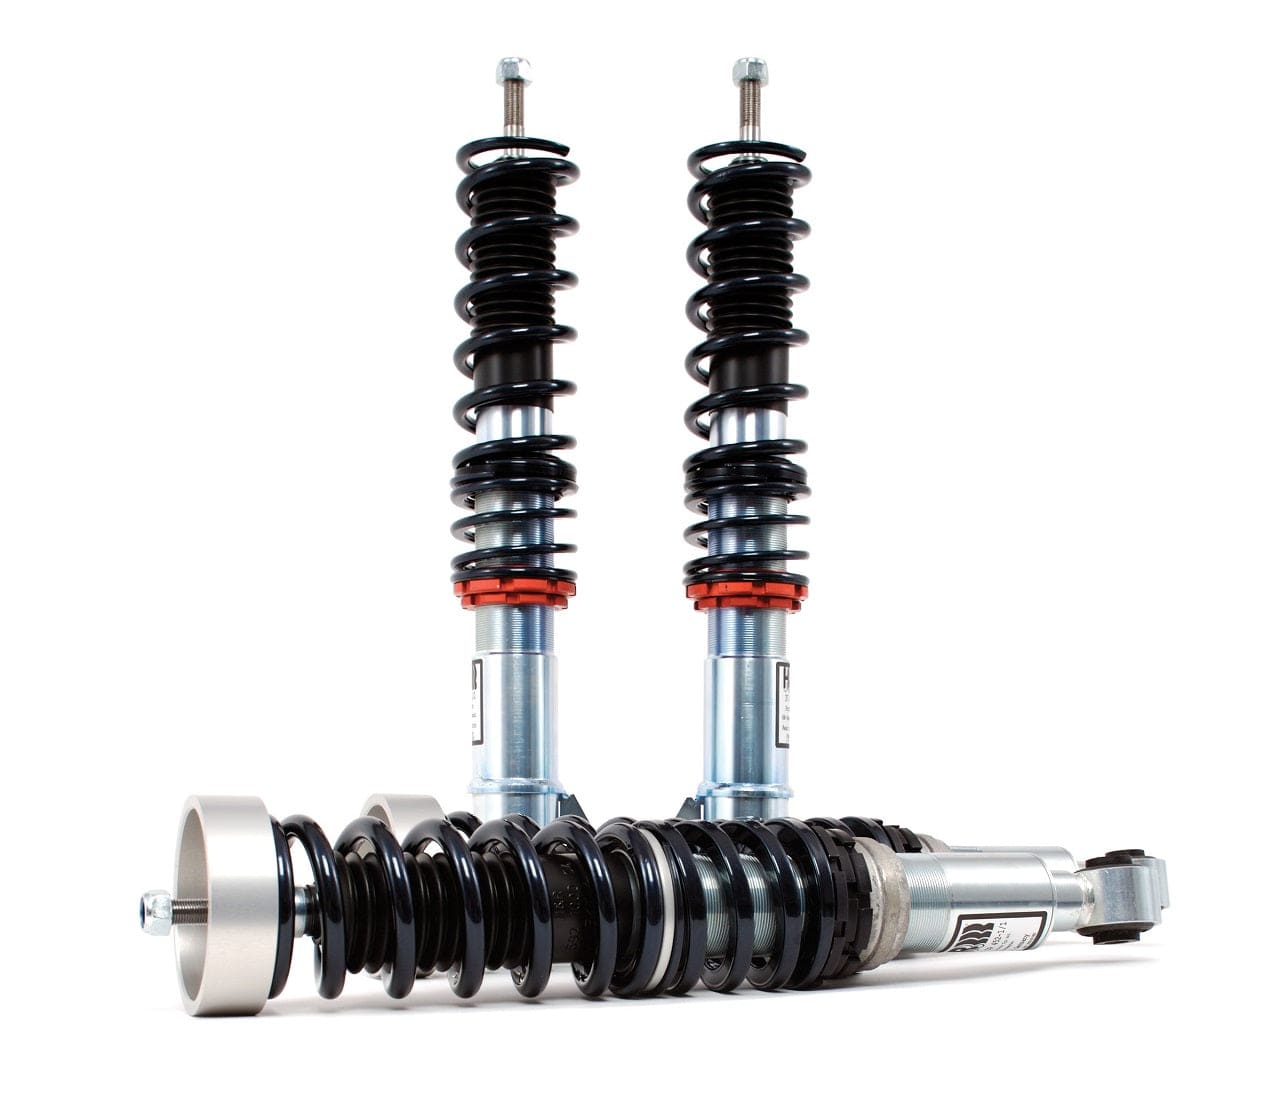 H&R RSS Coilovers for 2005-2009 Ford Mustang Convertible V6/V8 RSS29170